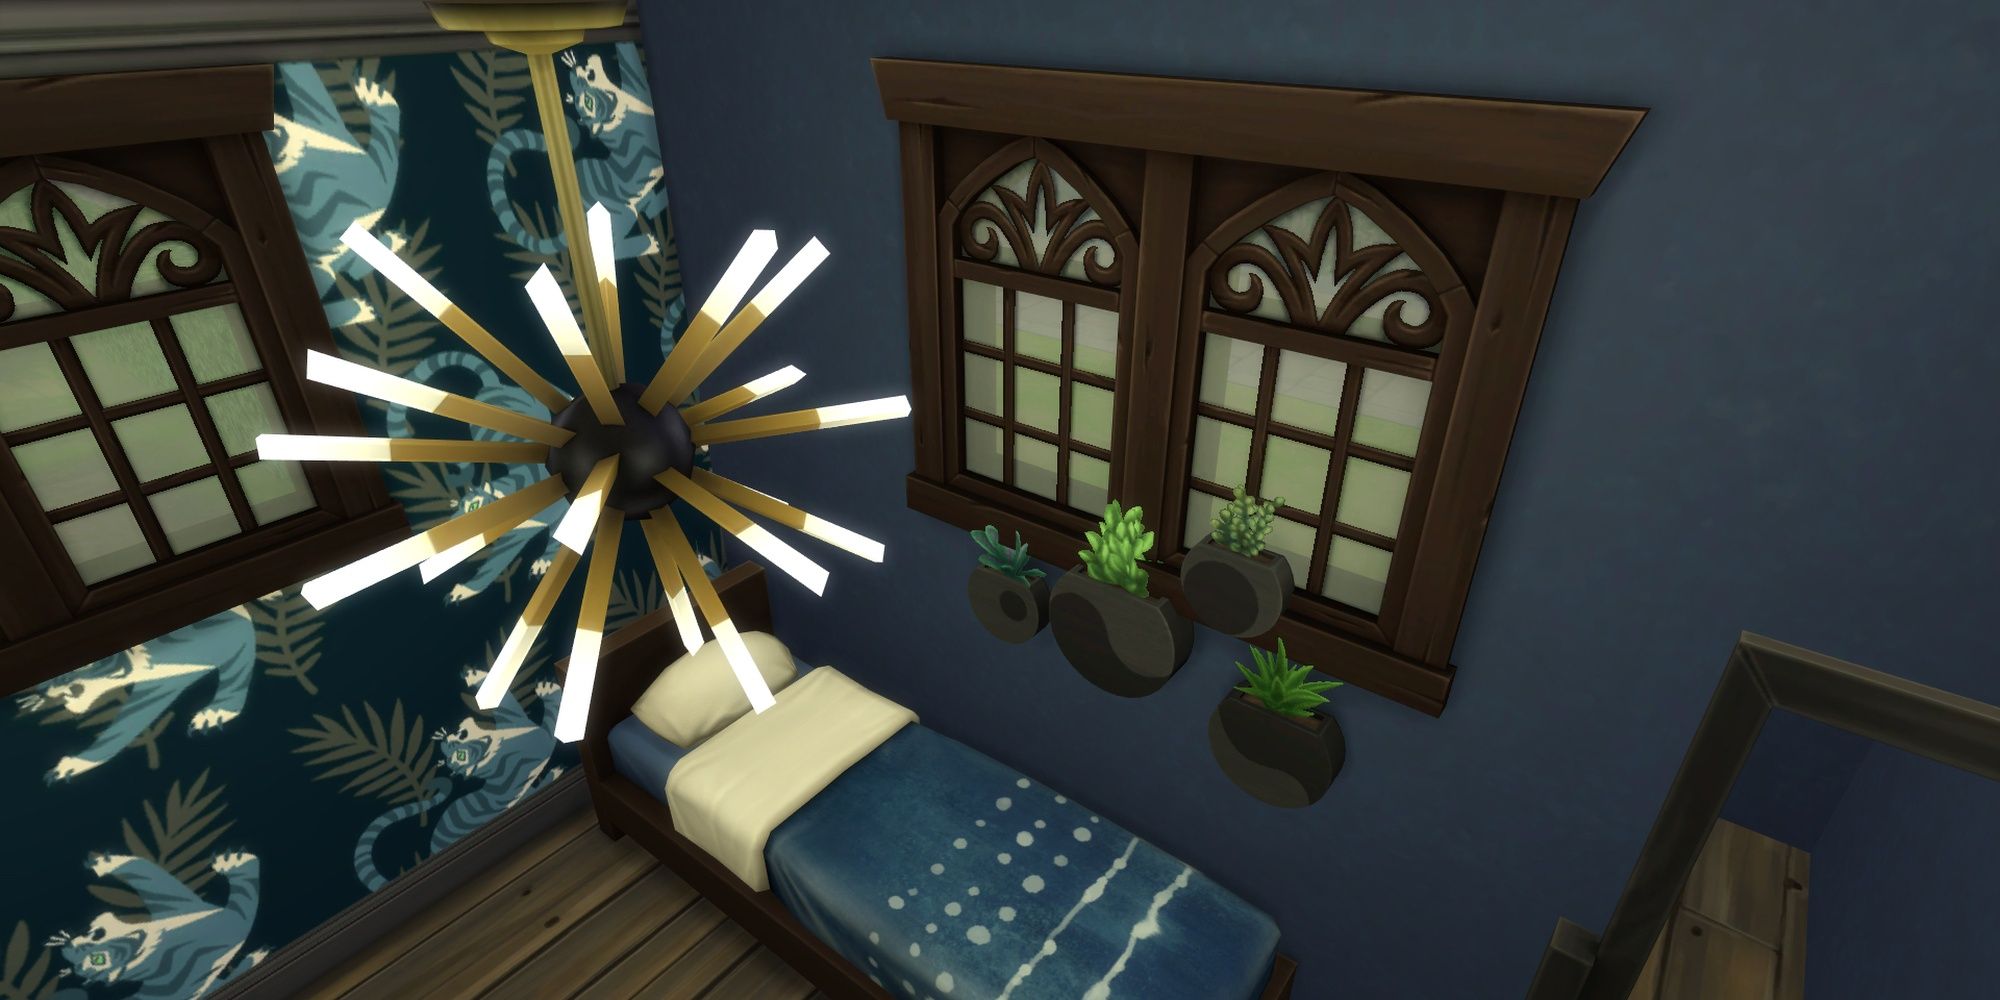 A starburst ceiling light from The Sims 4: Decor to the Max